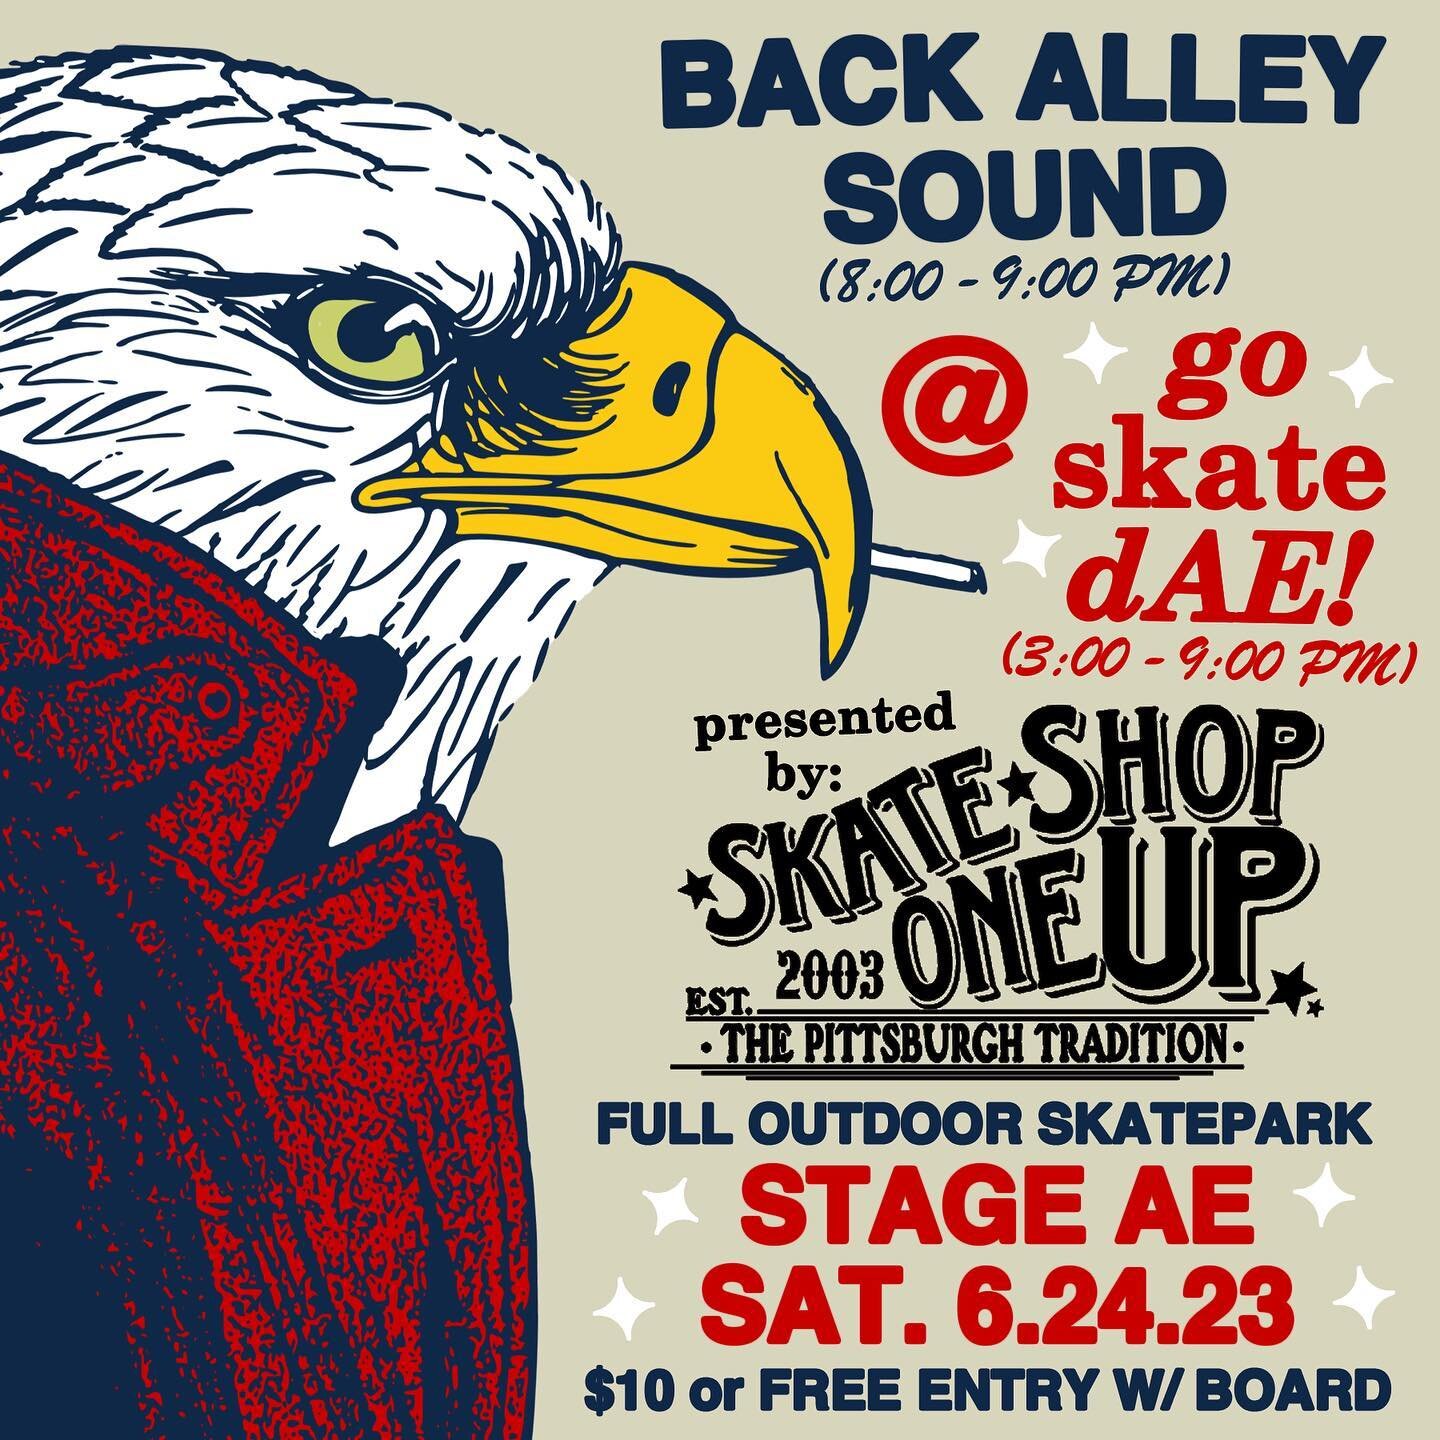 SATURDAY 6/24 you can catch our boney behinds shimmying and shaking on the outdoor stage at @stageae for the FIRST TIME thanks to the literal blessing given to us by the homies over at @oneuppgh. They&rsquo;re pulling out all the stops to show yinz t